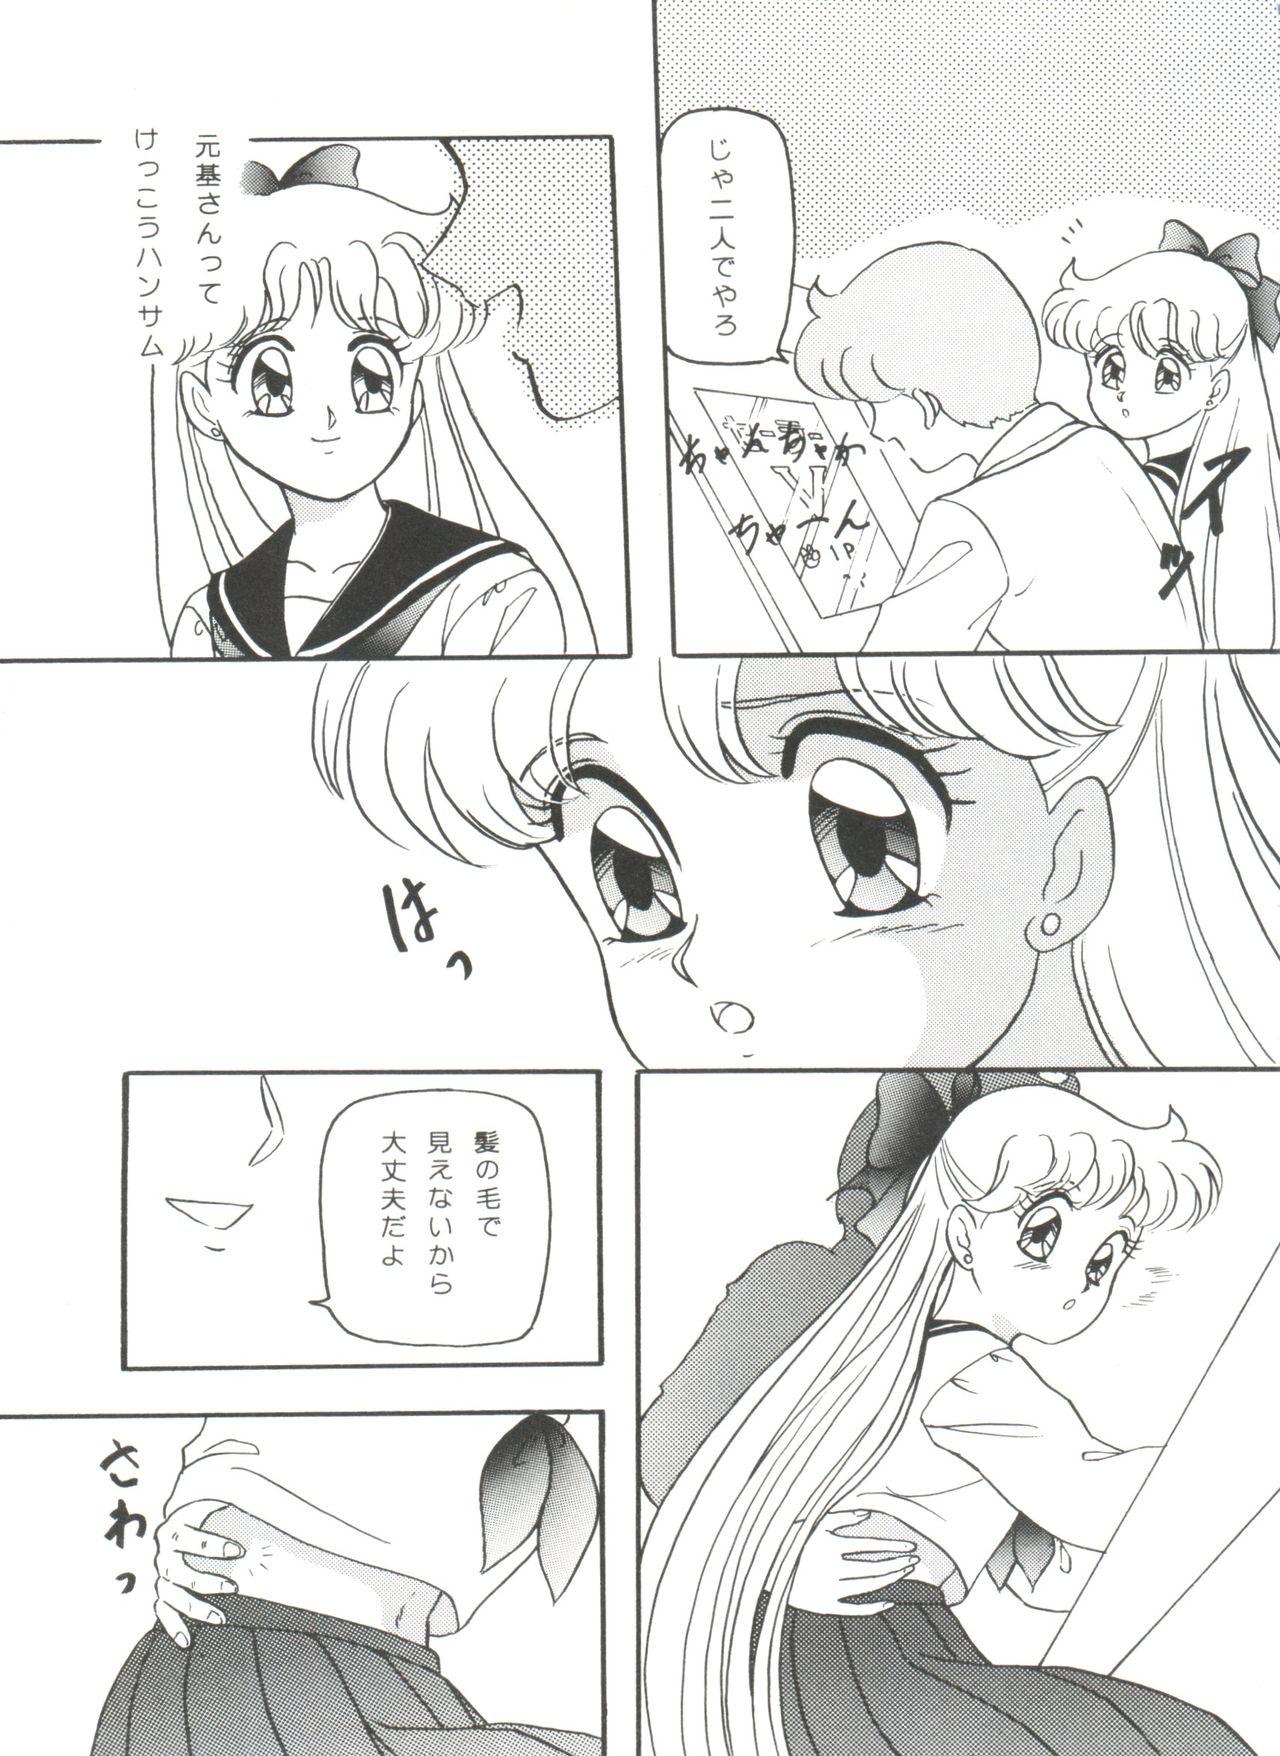 Punishment From the Moon - Sailor moon Porno Amateur - Page 7